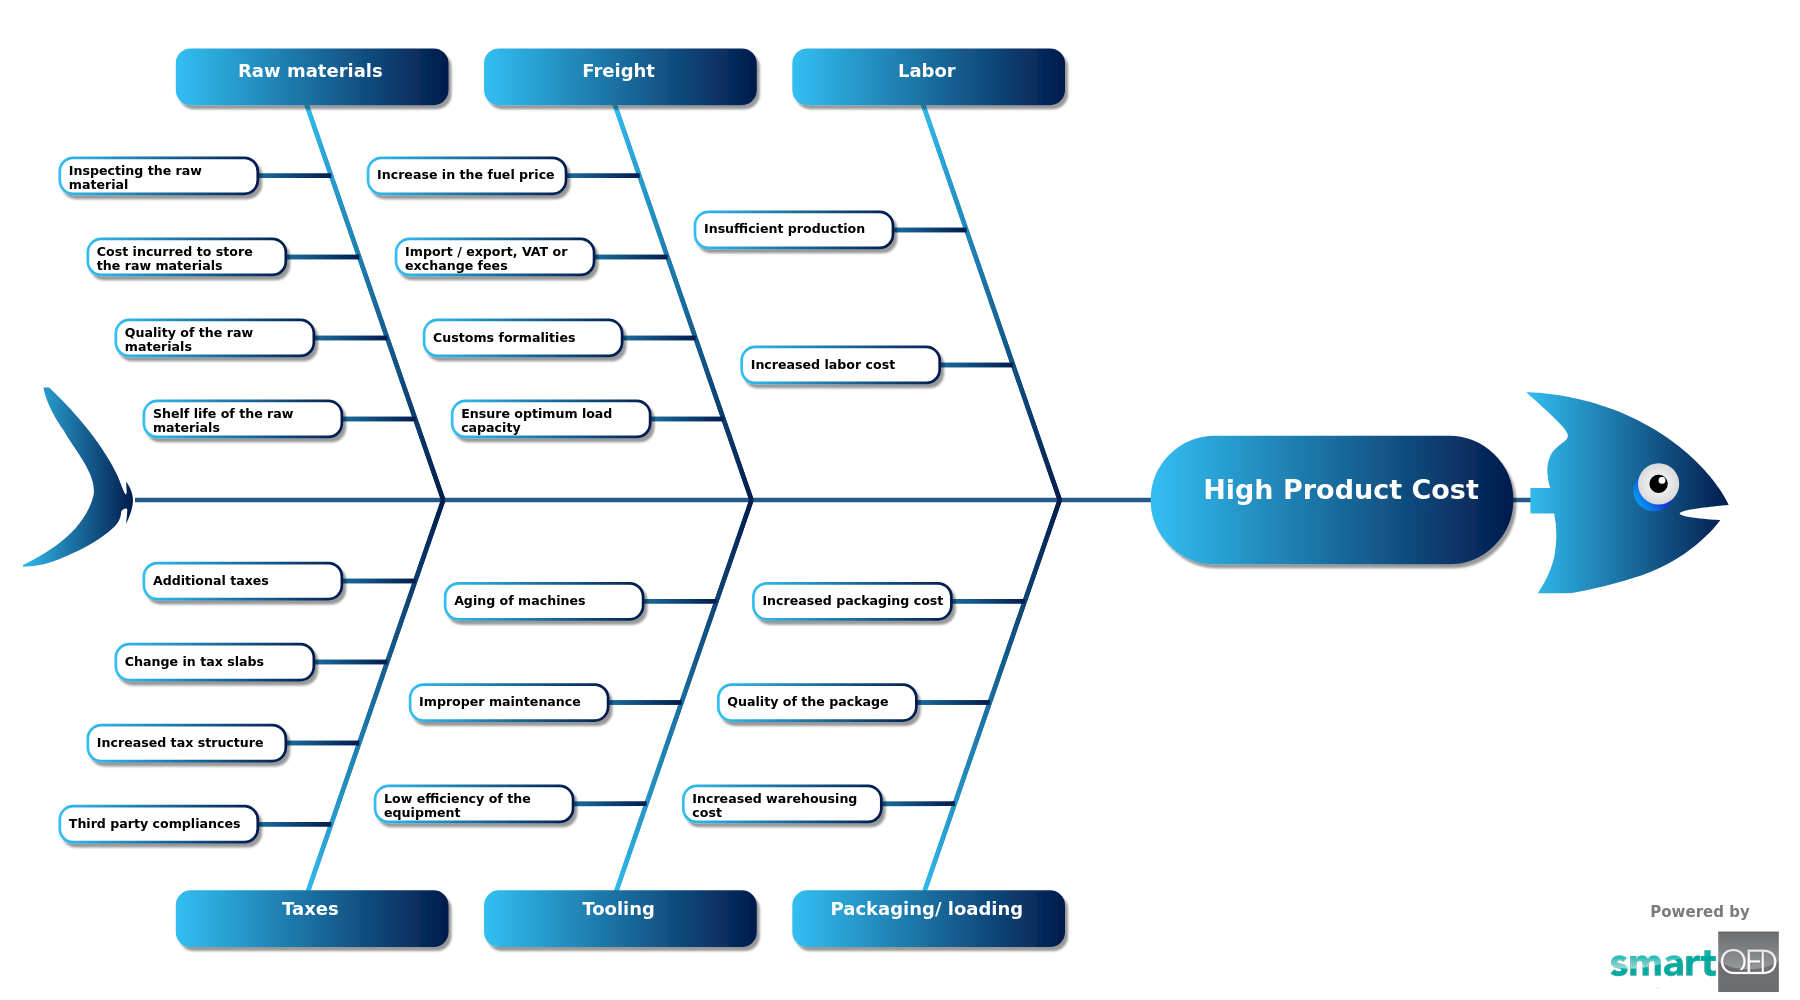 Fishbone template on high product cost